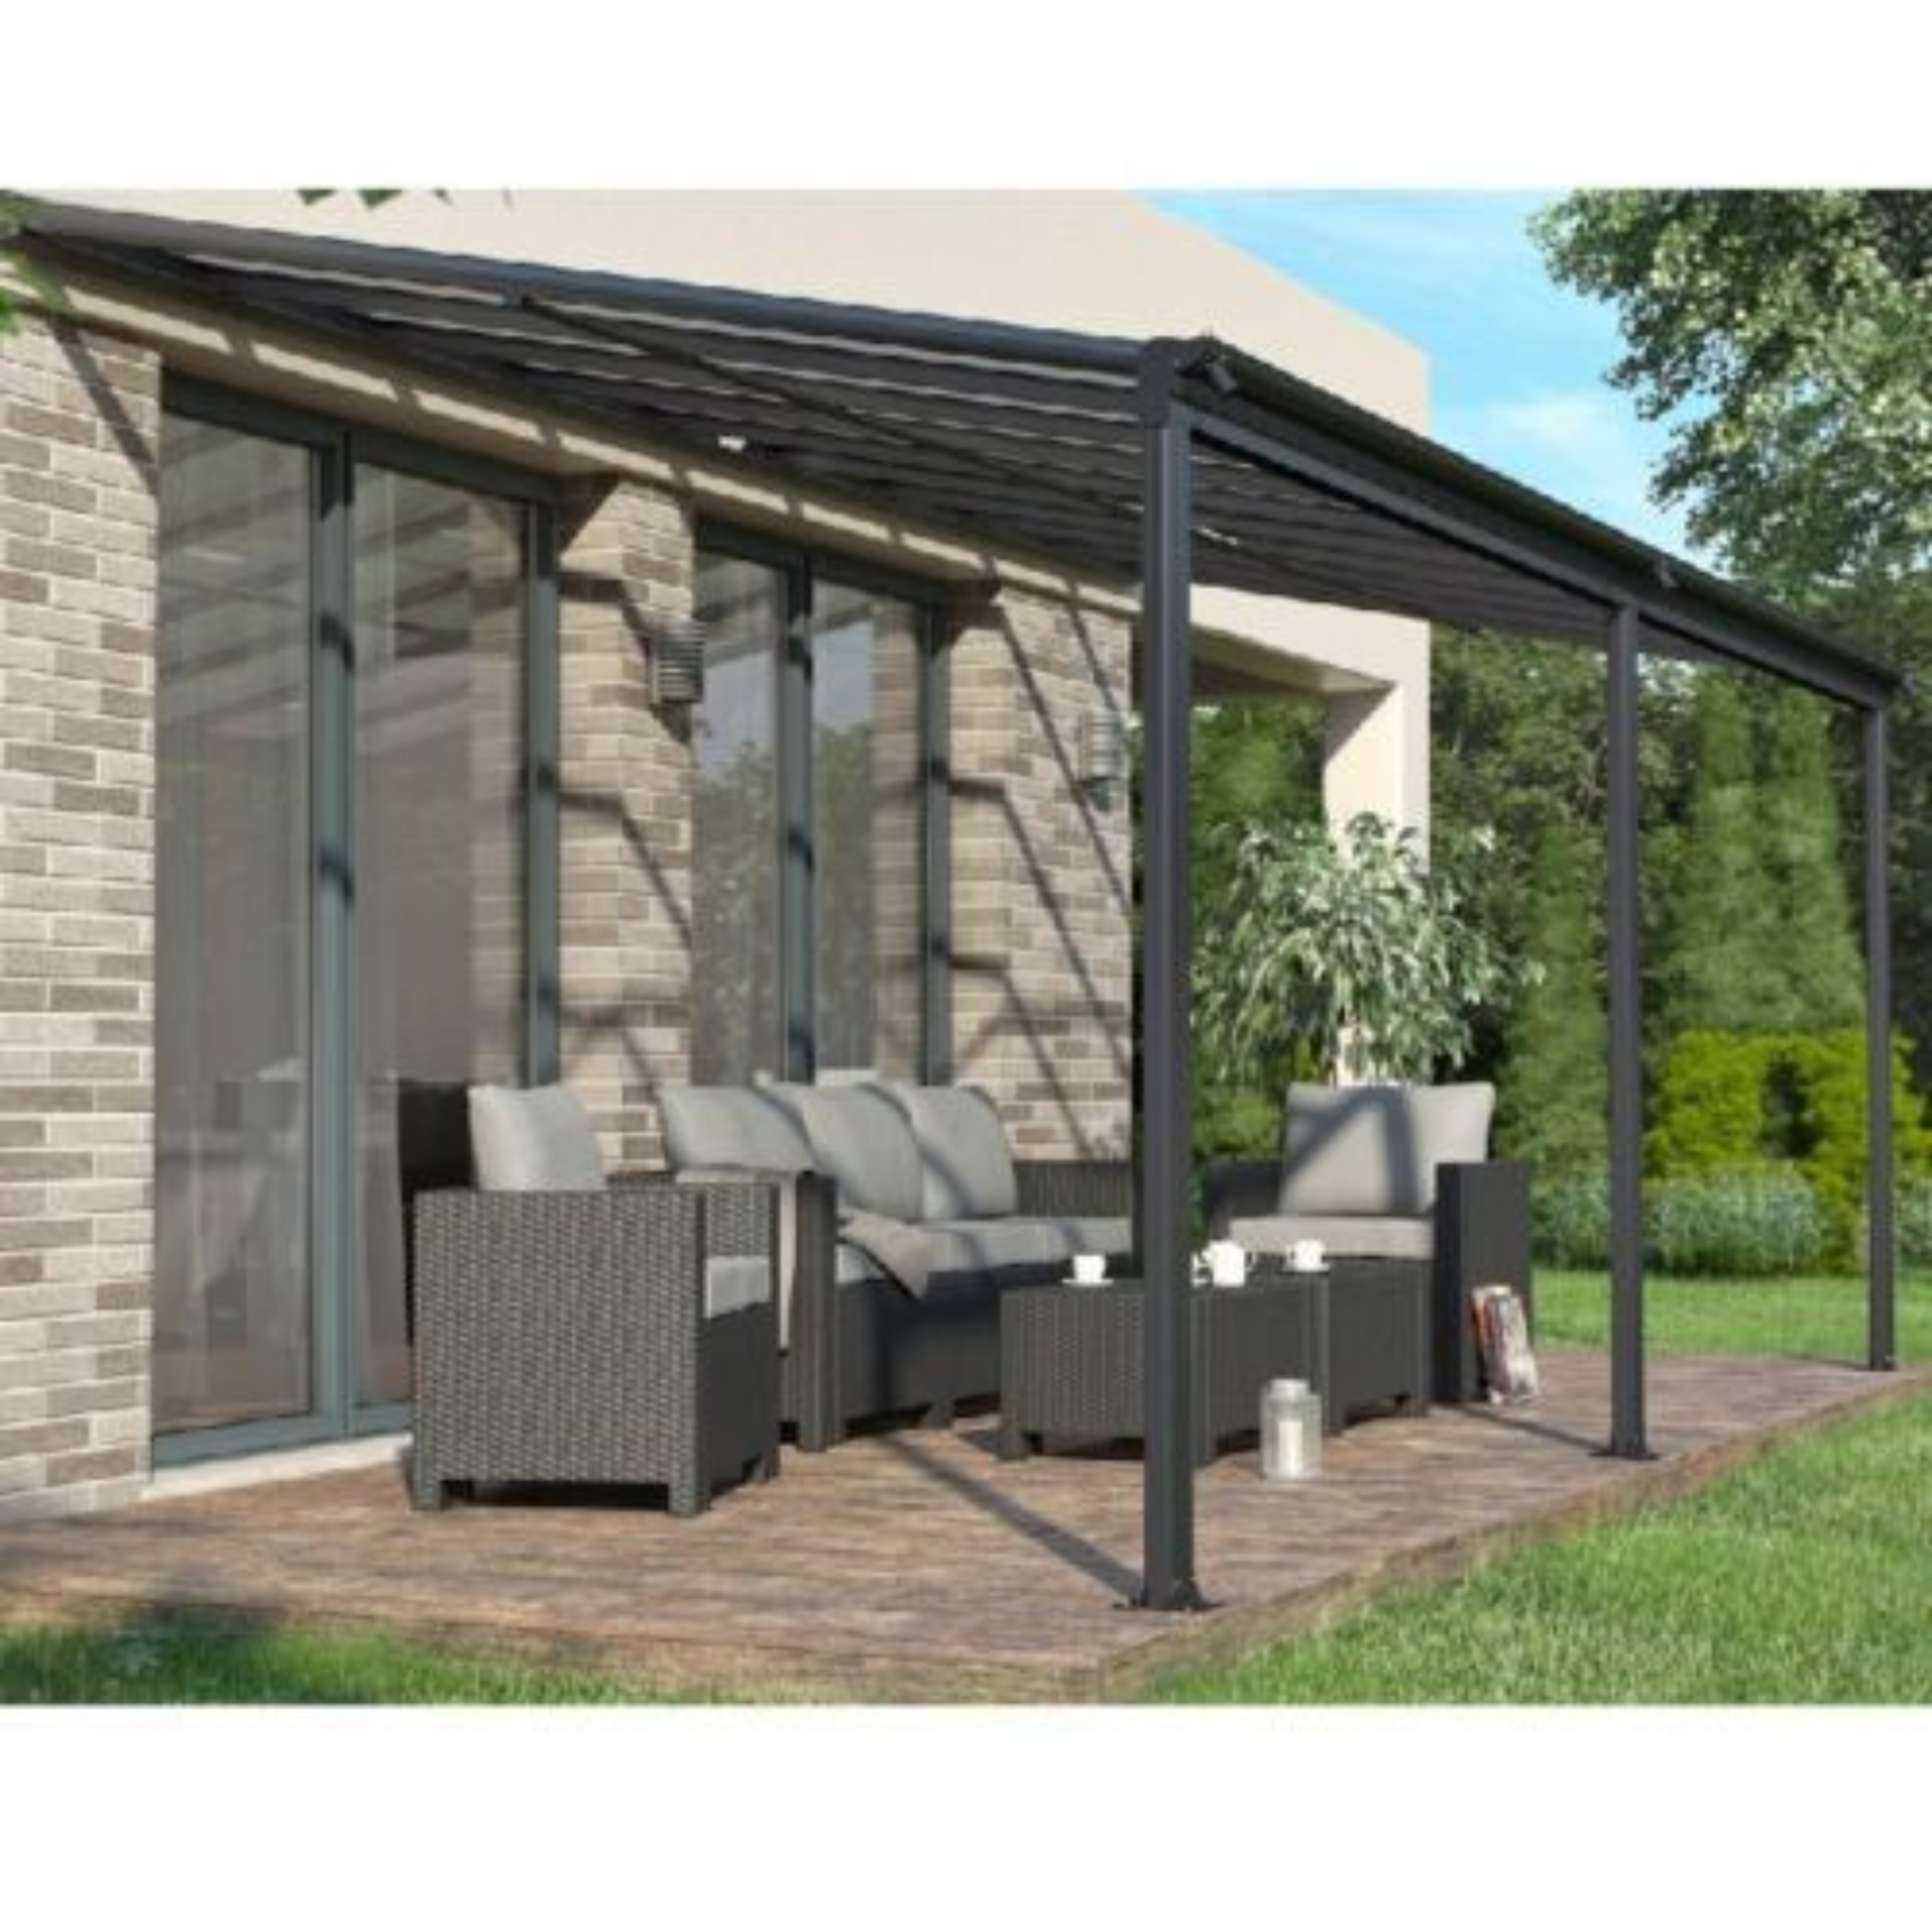 Kingston 10’ Wide Lean To Carport Patio Cover  - 10x14